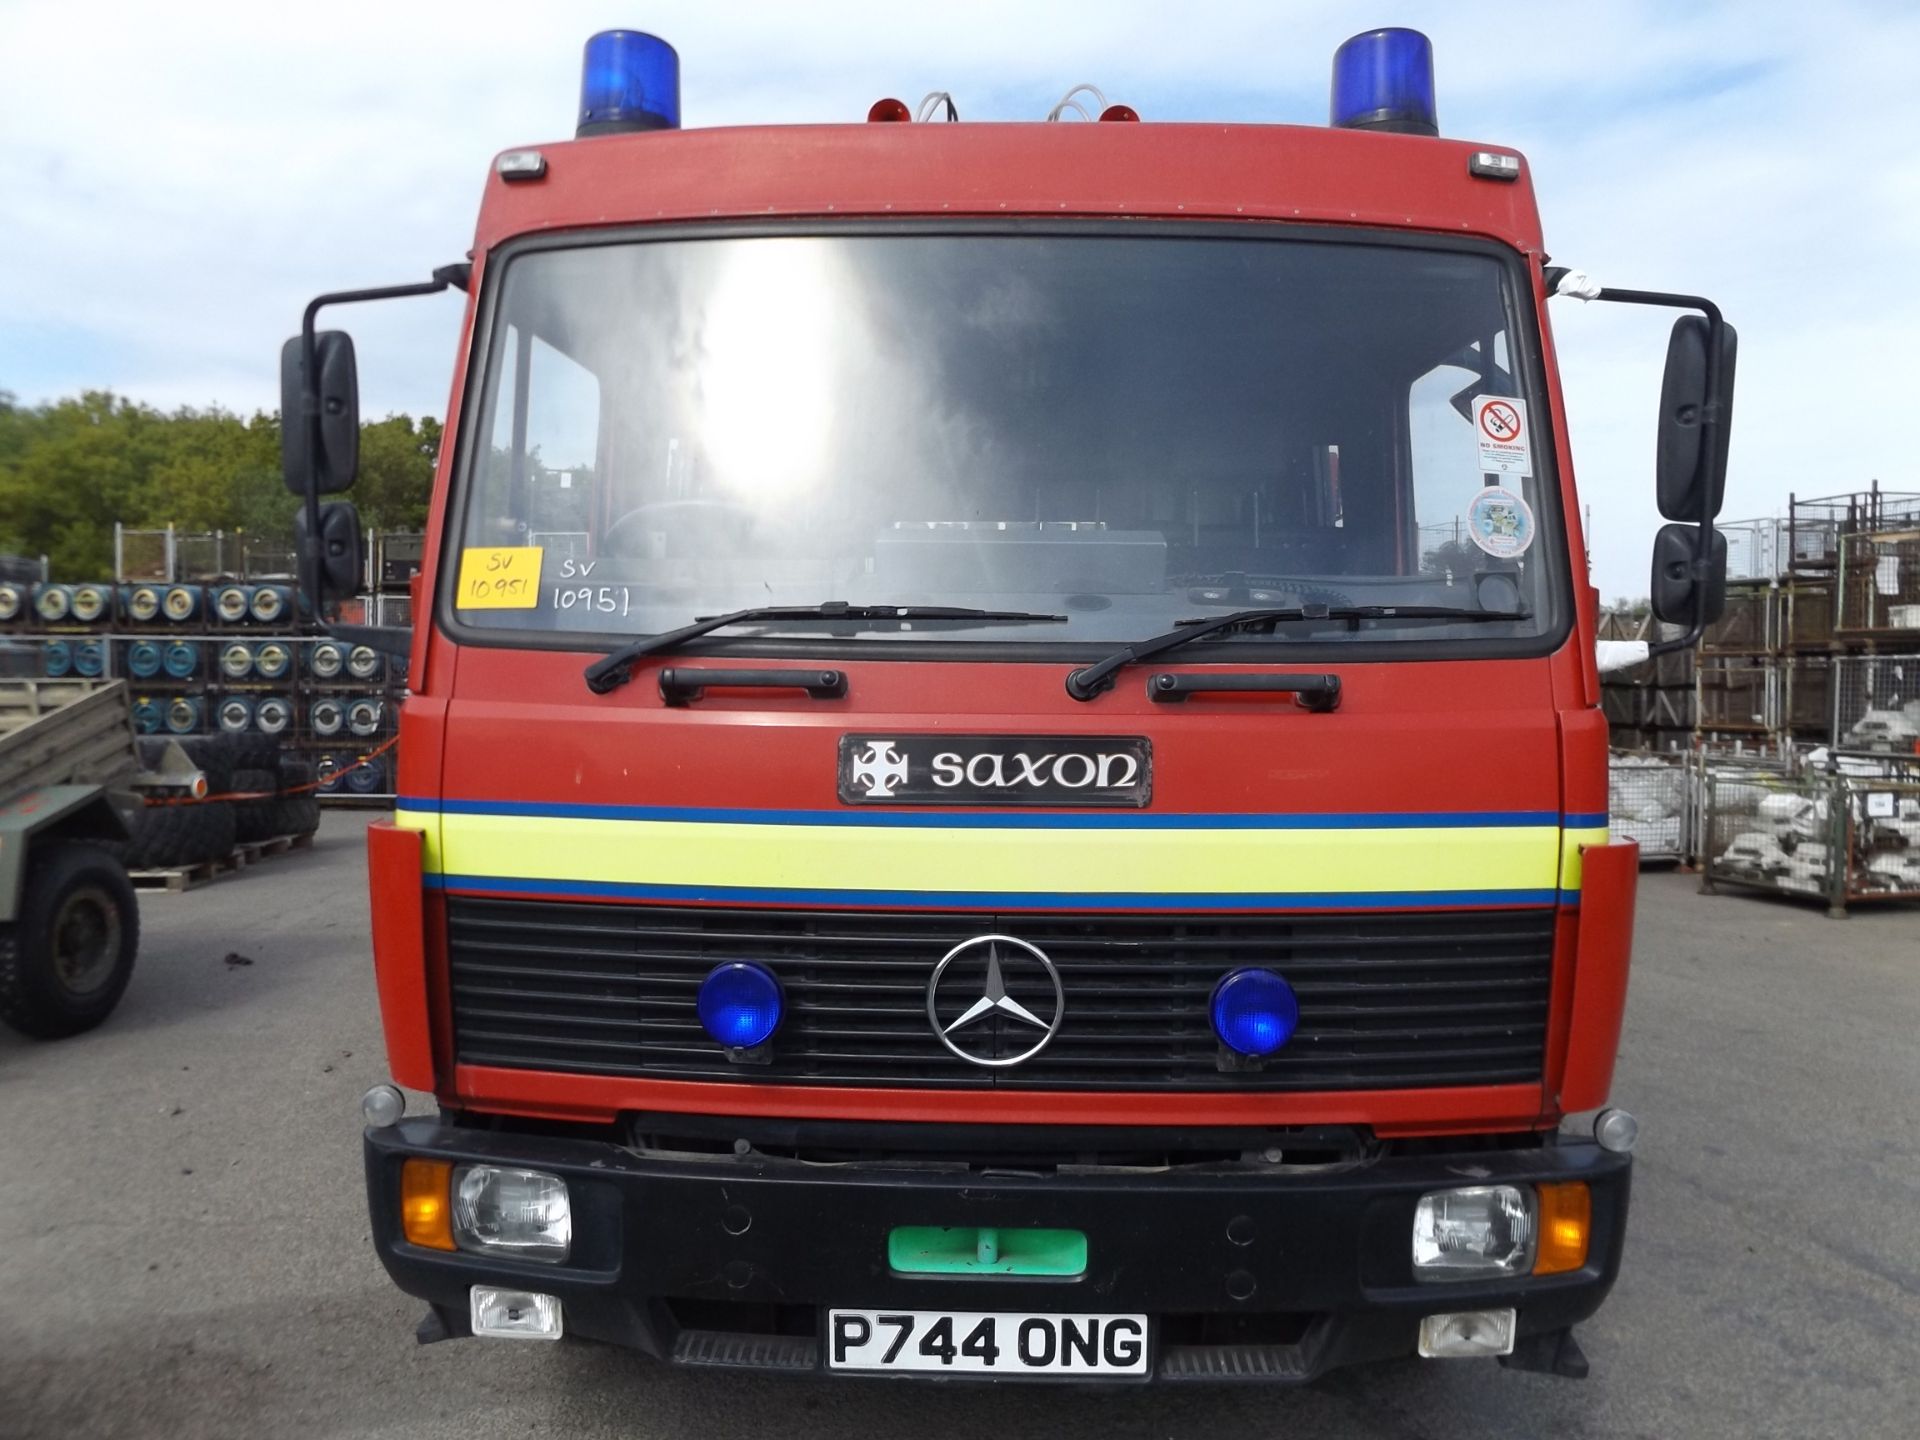 Mercedes 1124 Excaliber Fire Engine - Image 2 of 17